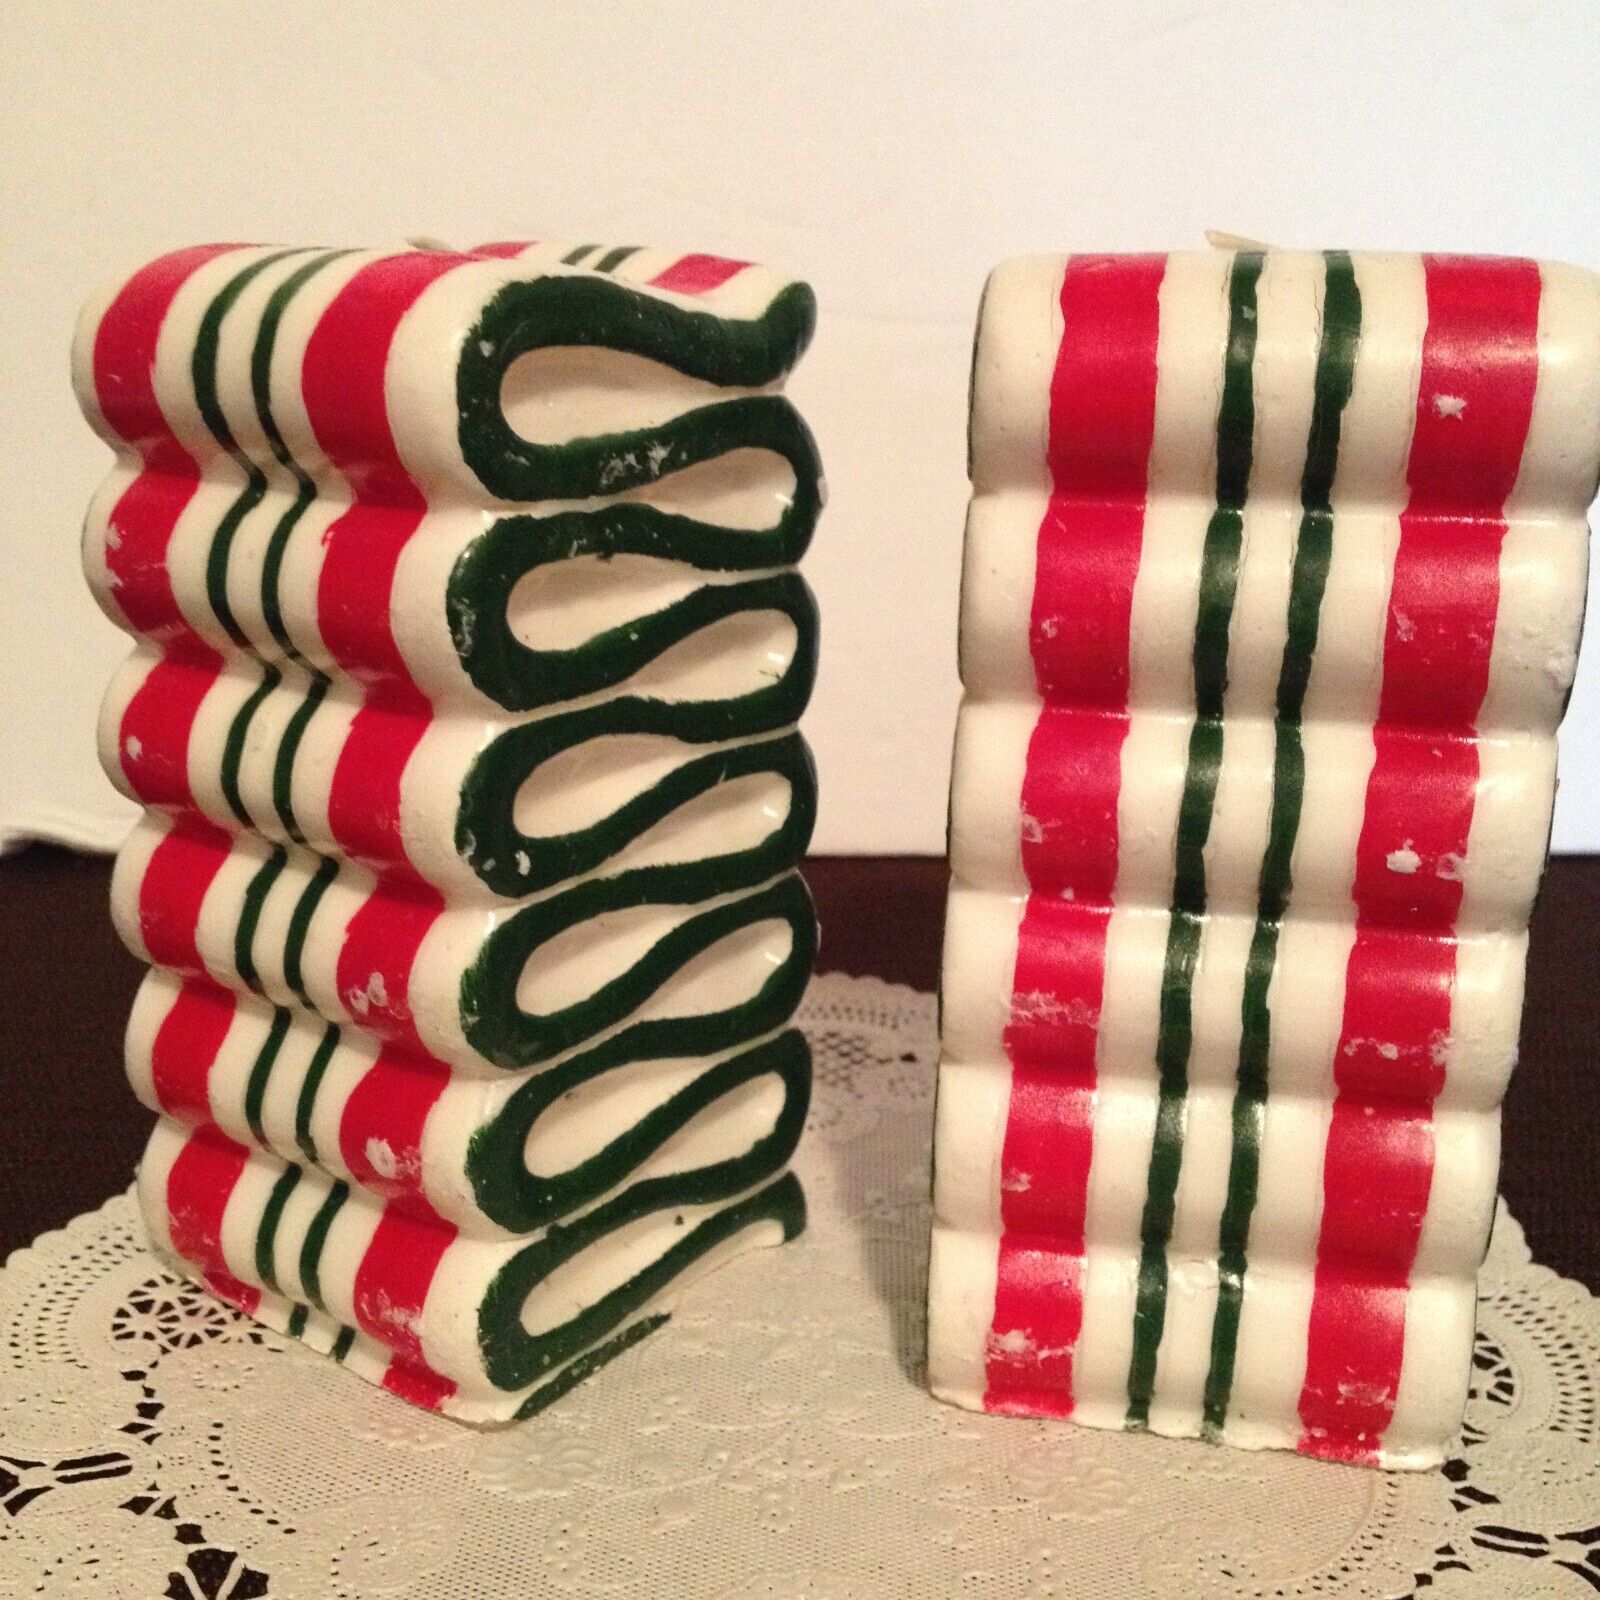 VTG Avon Ribbon Candles Christmas Holiday Red Green White 5”   Decorations